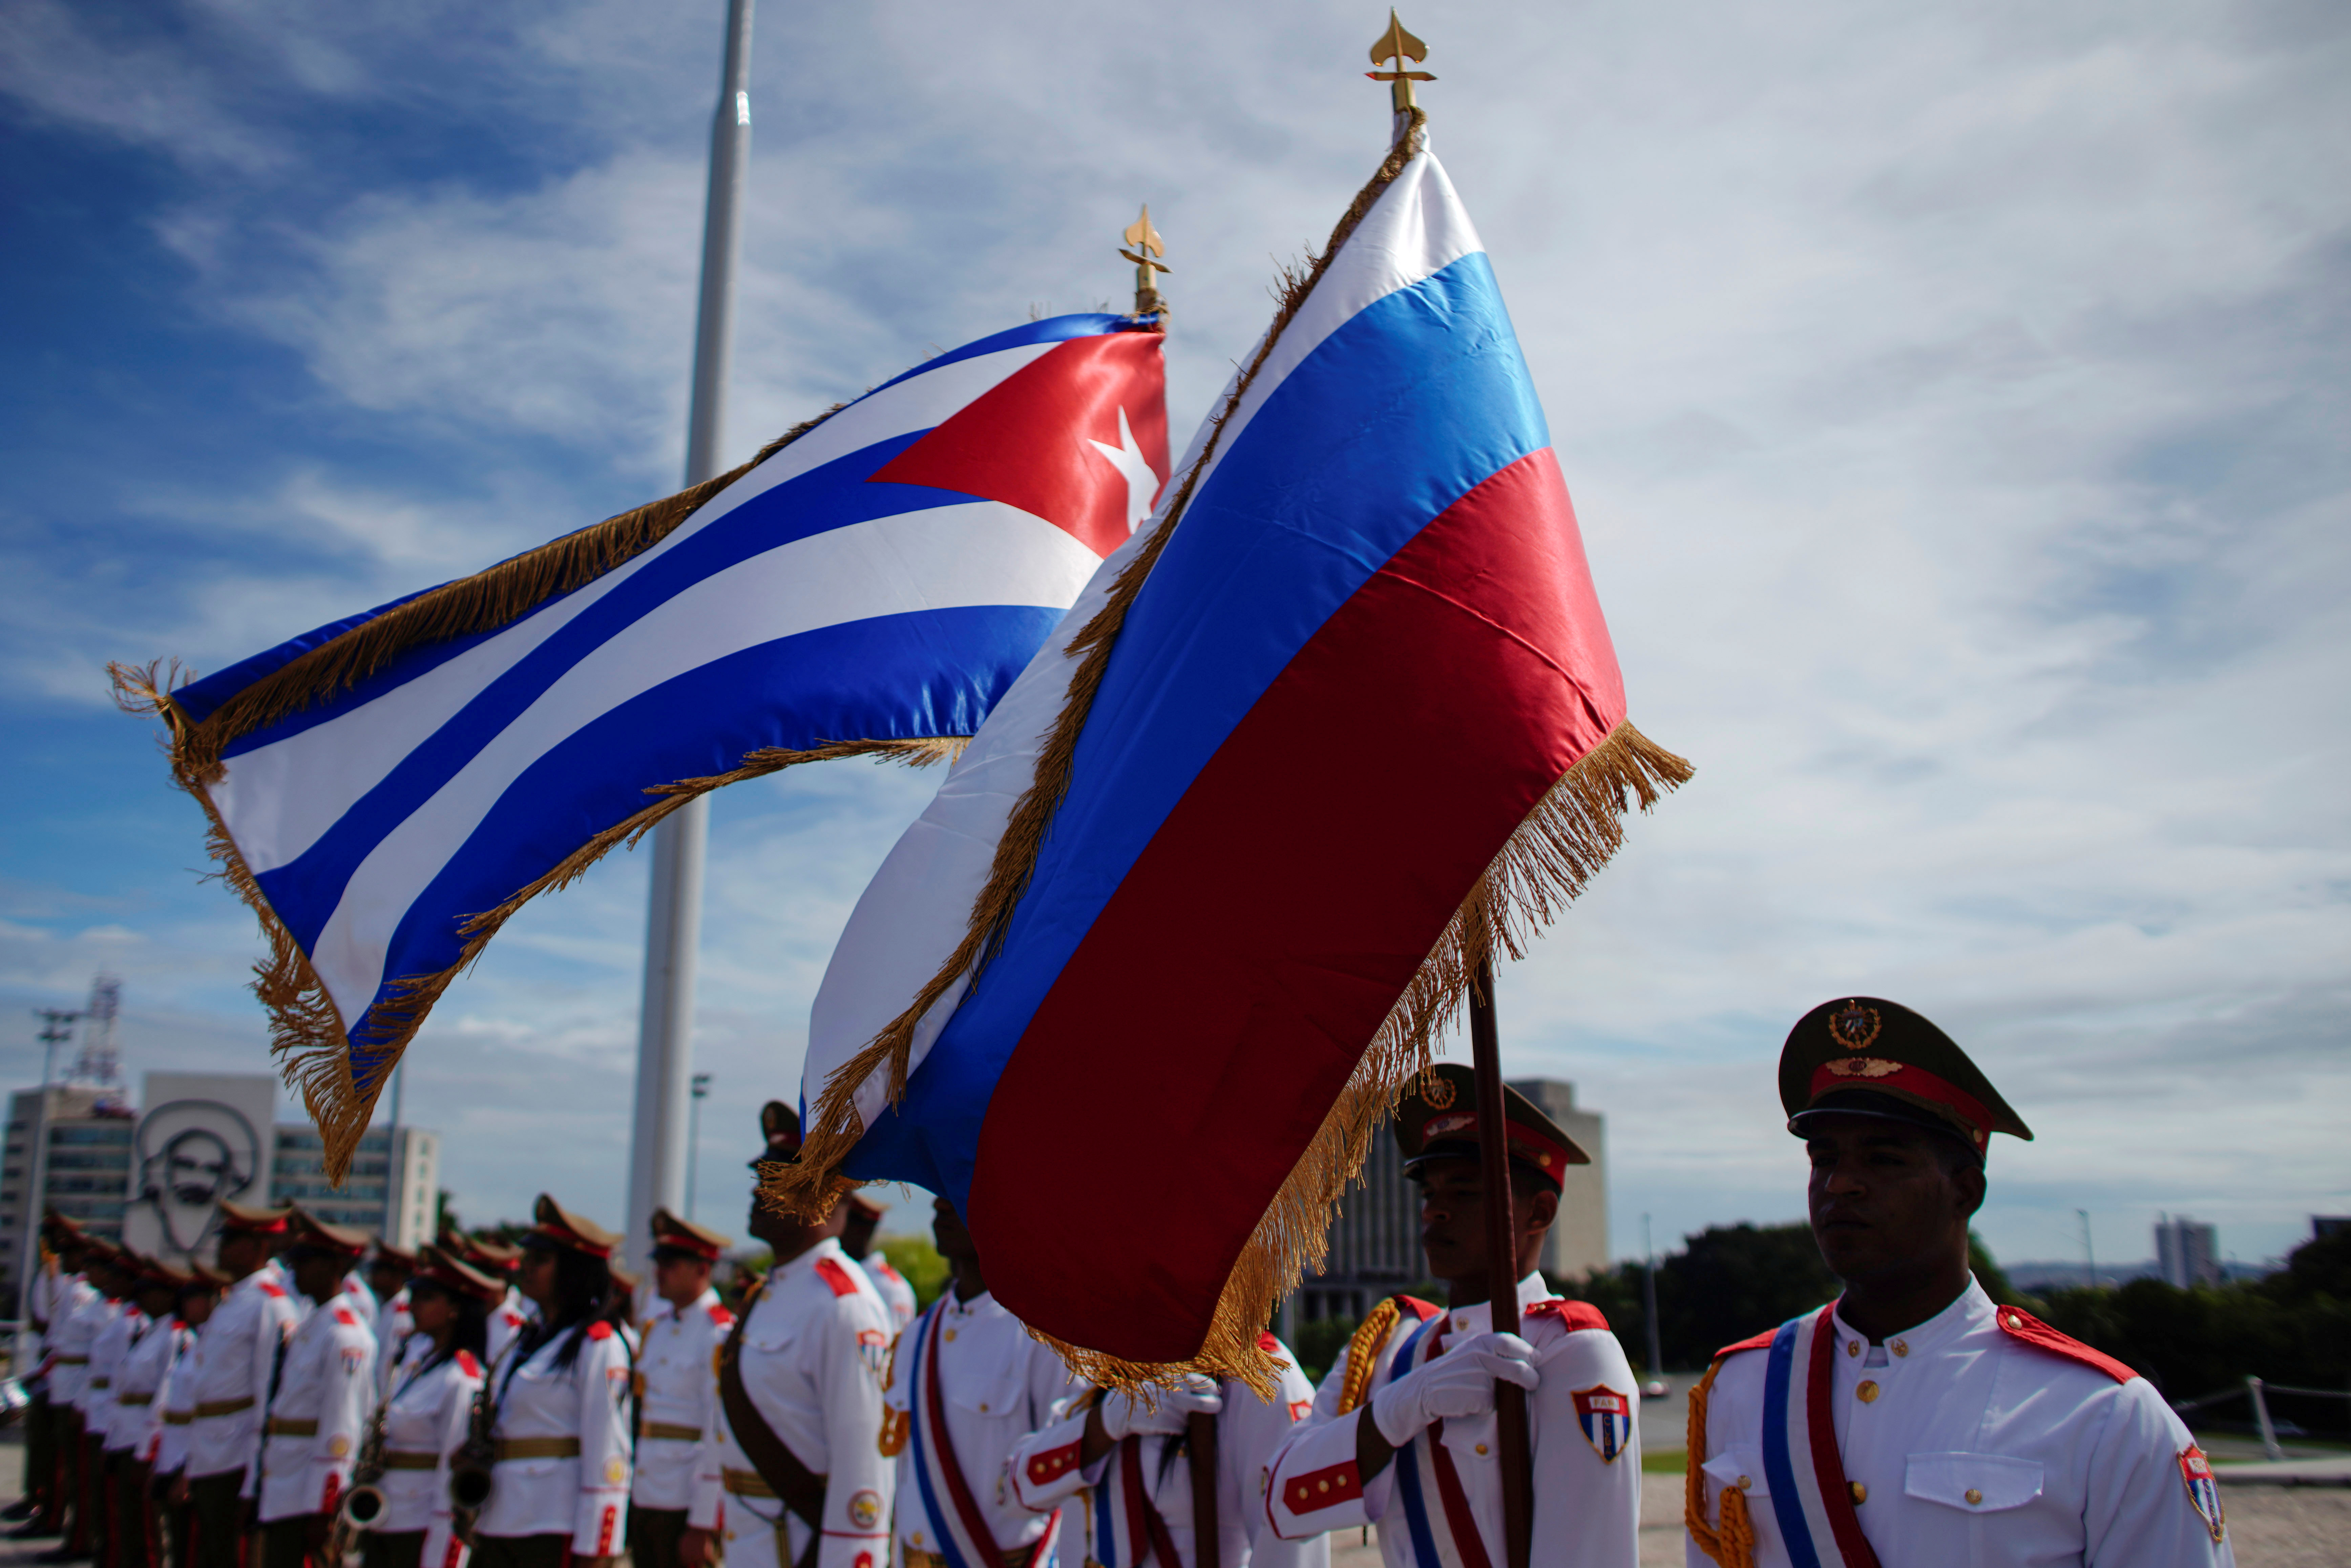 Honor guards hold a Russian and a Cuban flag during a wreath-laying ceremony with Russia's Prime Minister Dmitry Medvedev at the Jose Marti monument in Havana